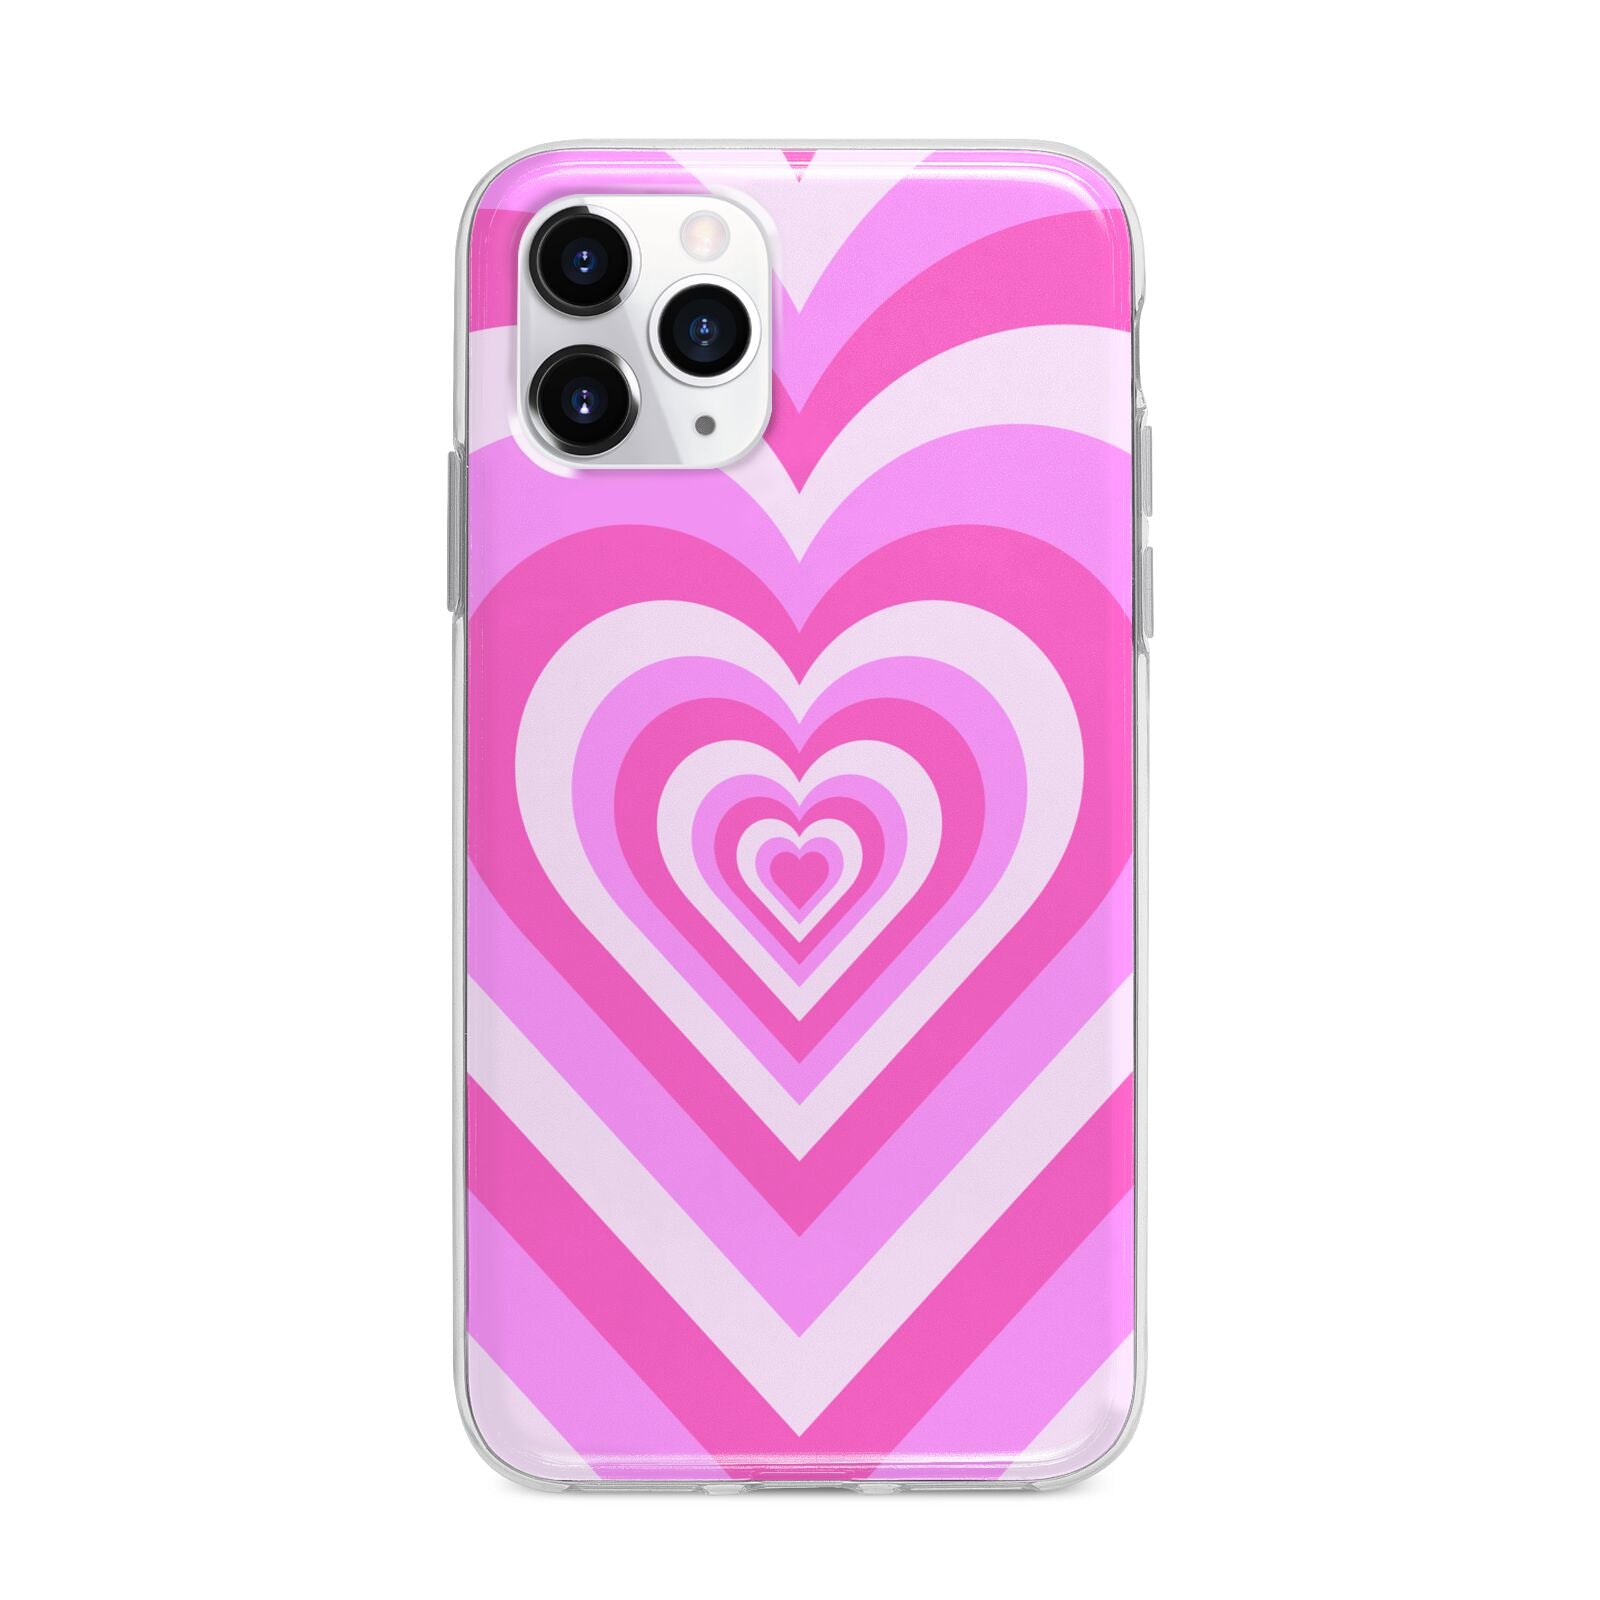 Aesthetic Heart Apple iPhone 11 Pro Max in Silver with Bumper Case